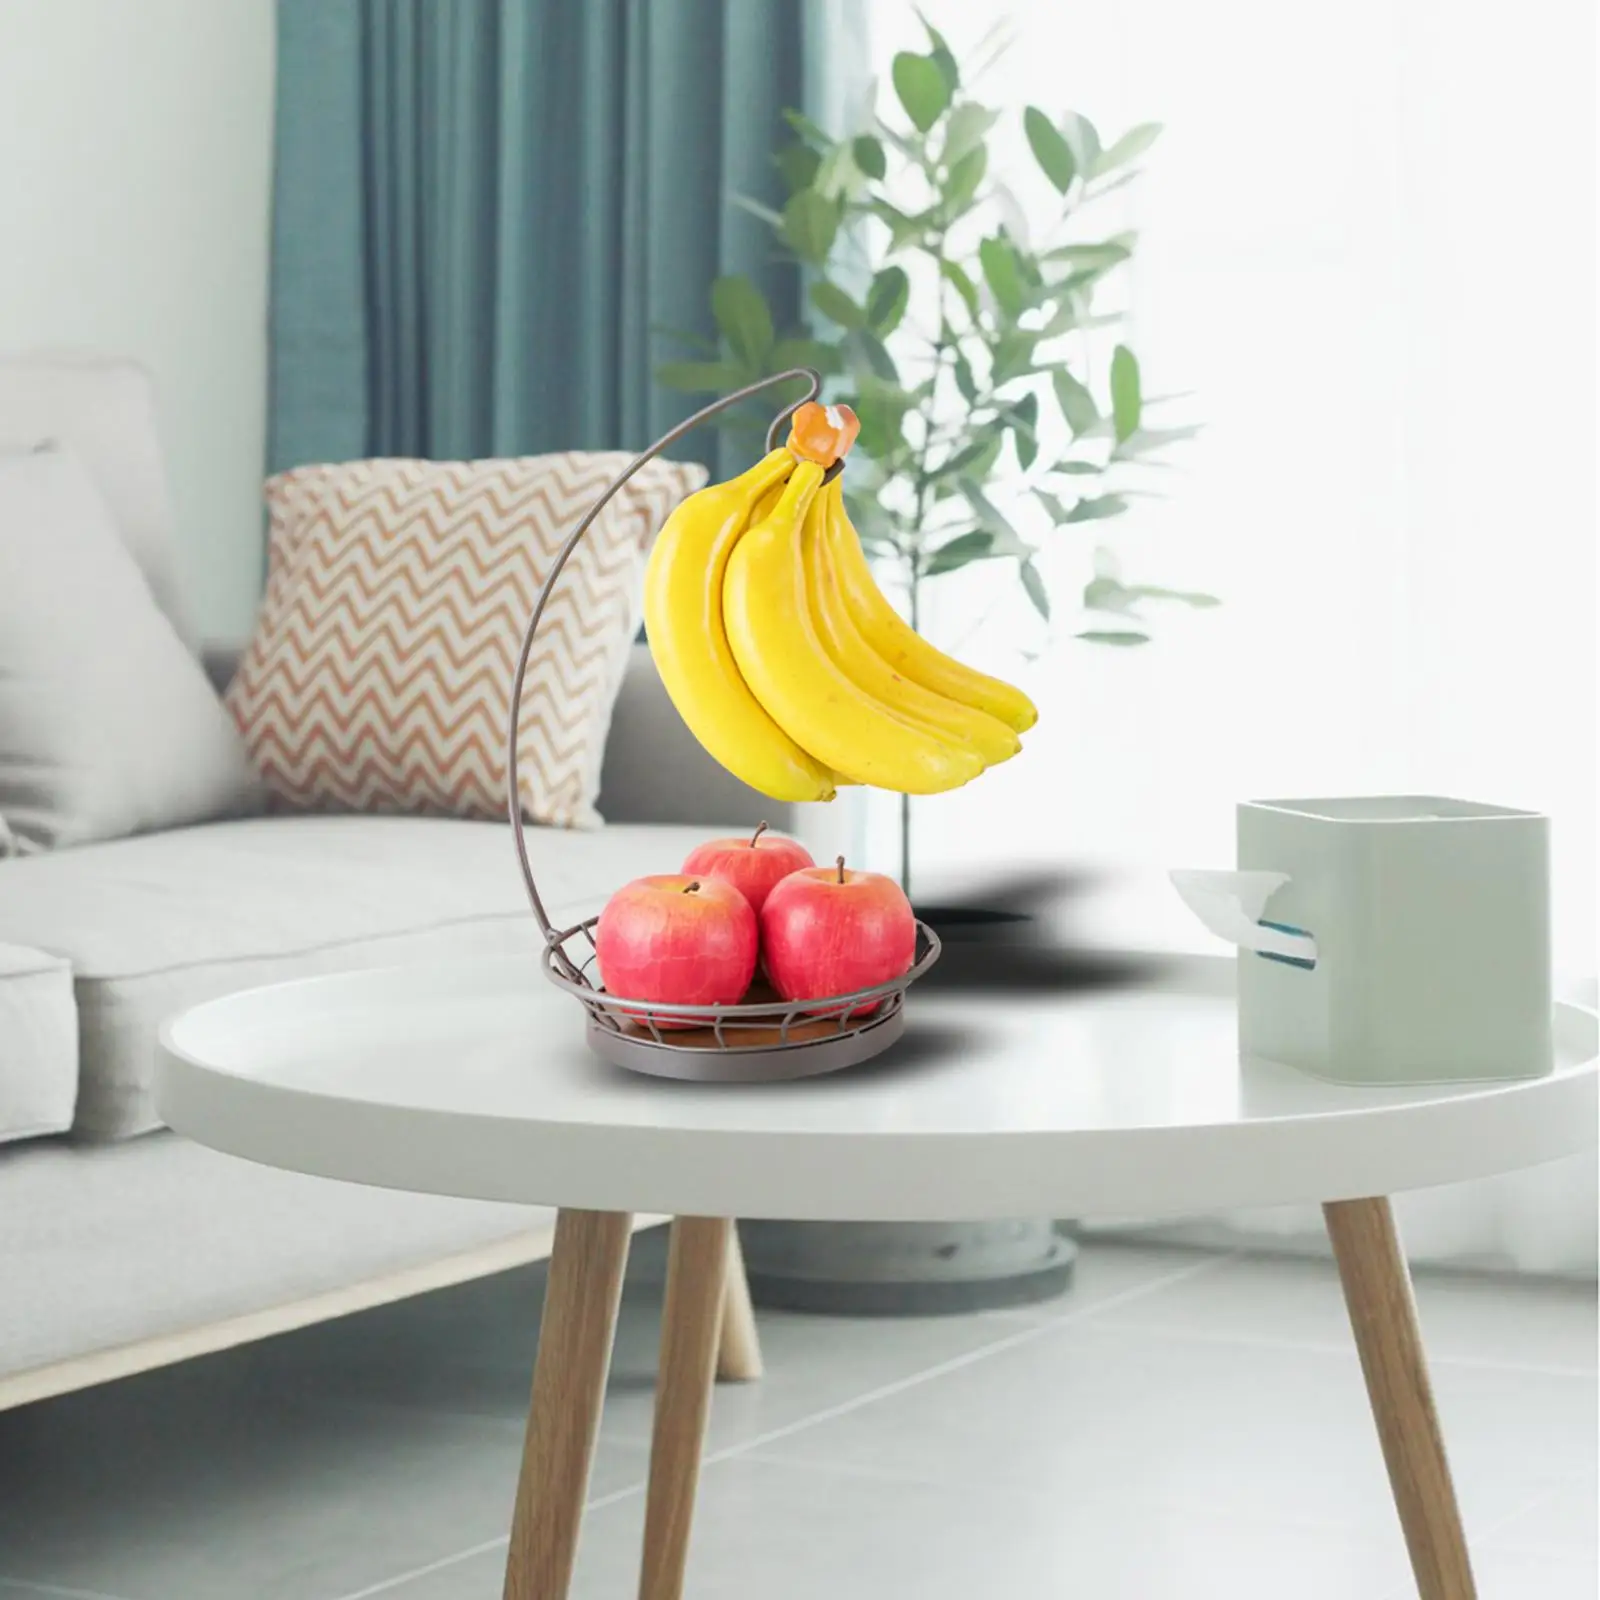 2 in 1 Banana Holder Counter Top Stand with Fruit Bowl Egg Holder Table Storage Stand